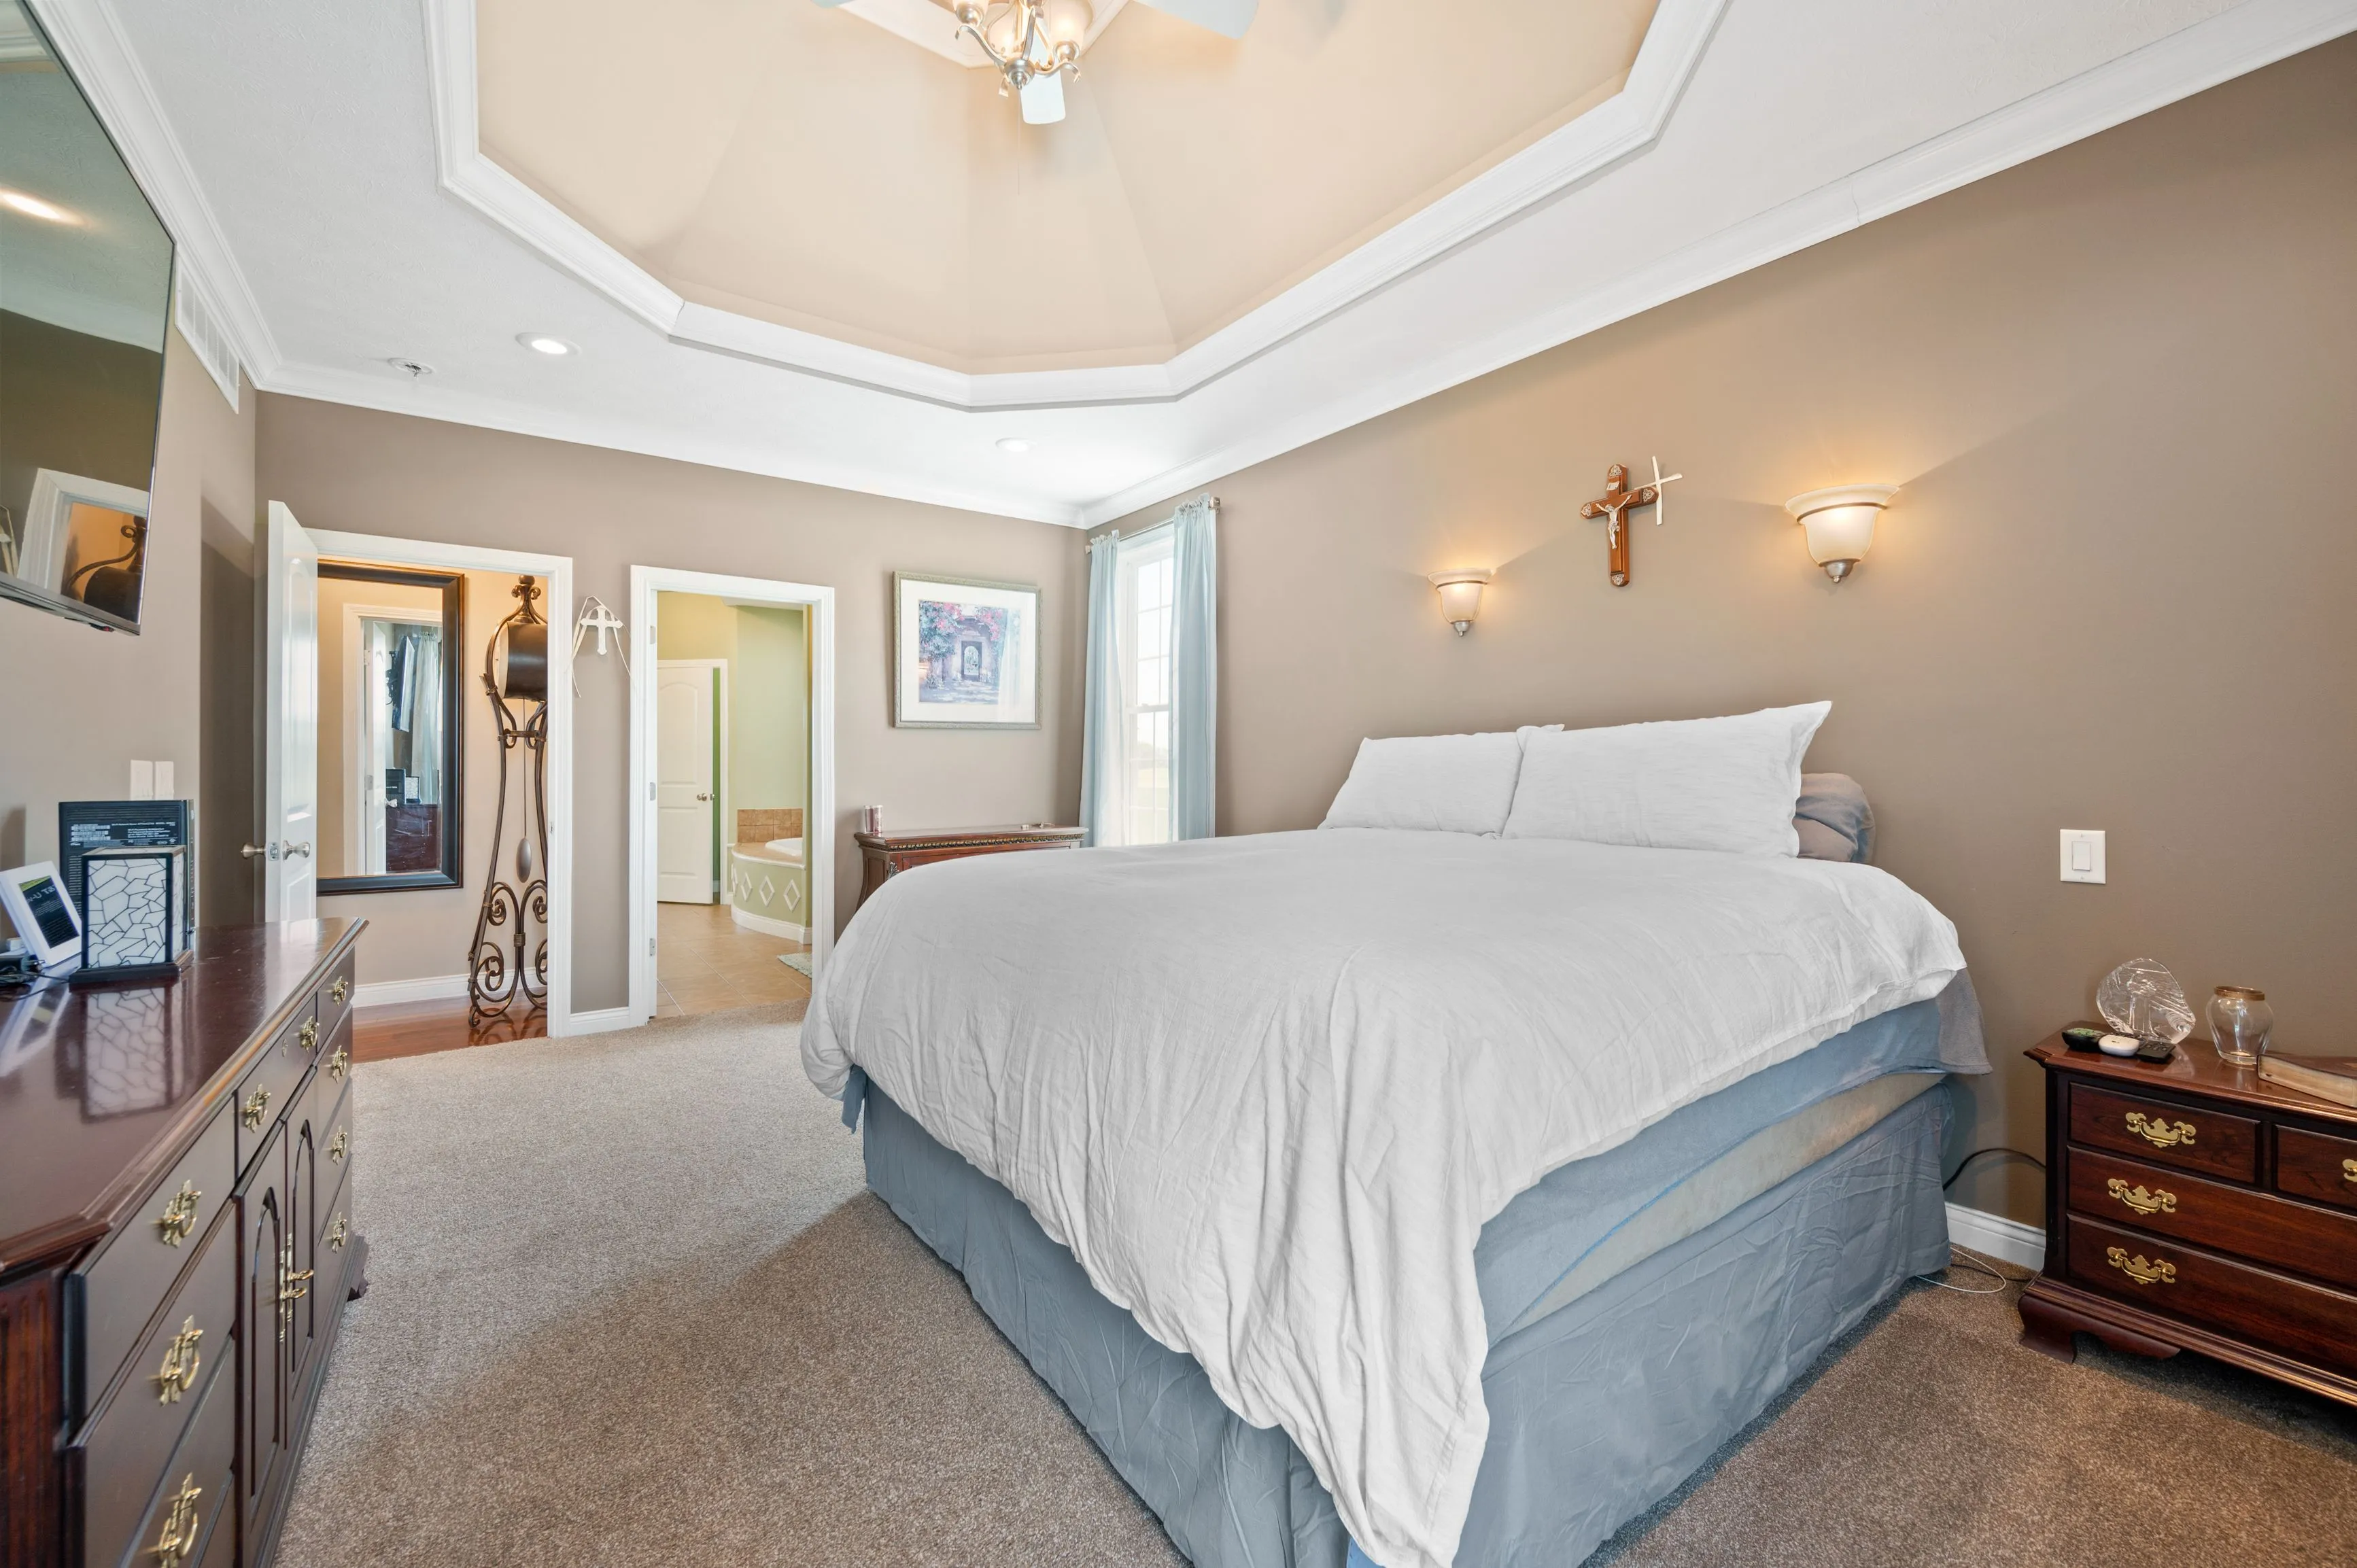 Elegant bedroom interior with a large bed, side tables, and a tray ceiling.